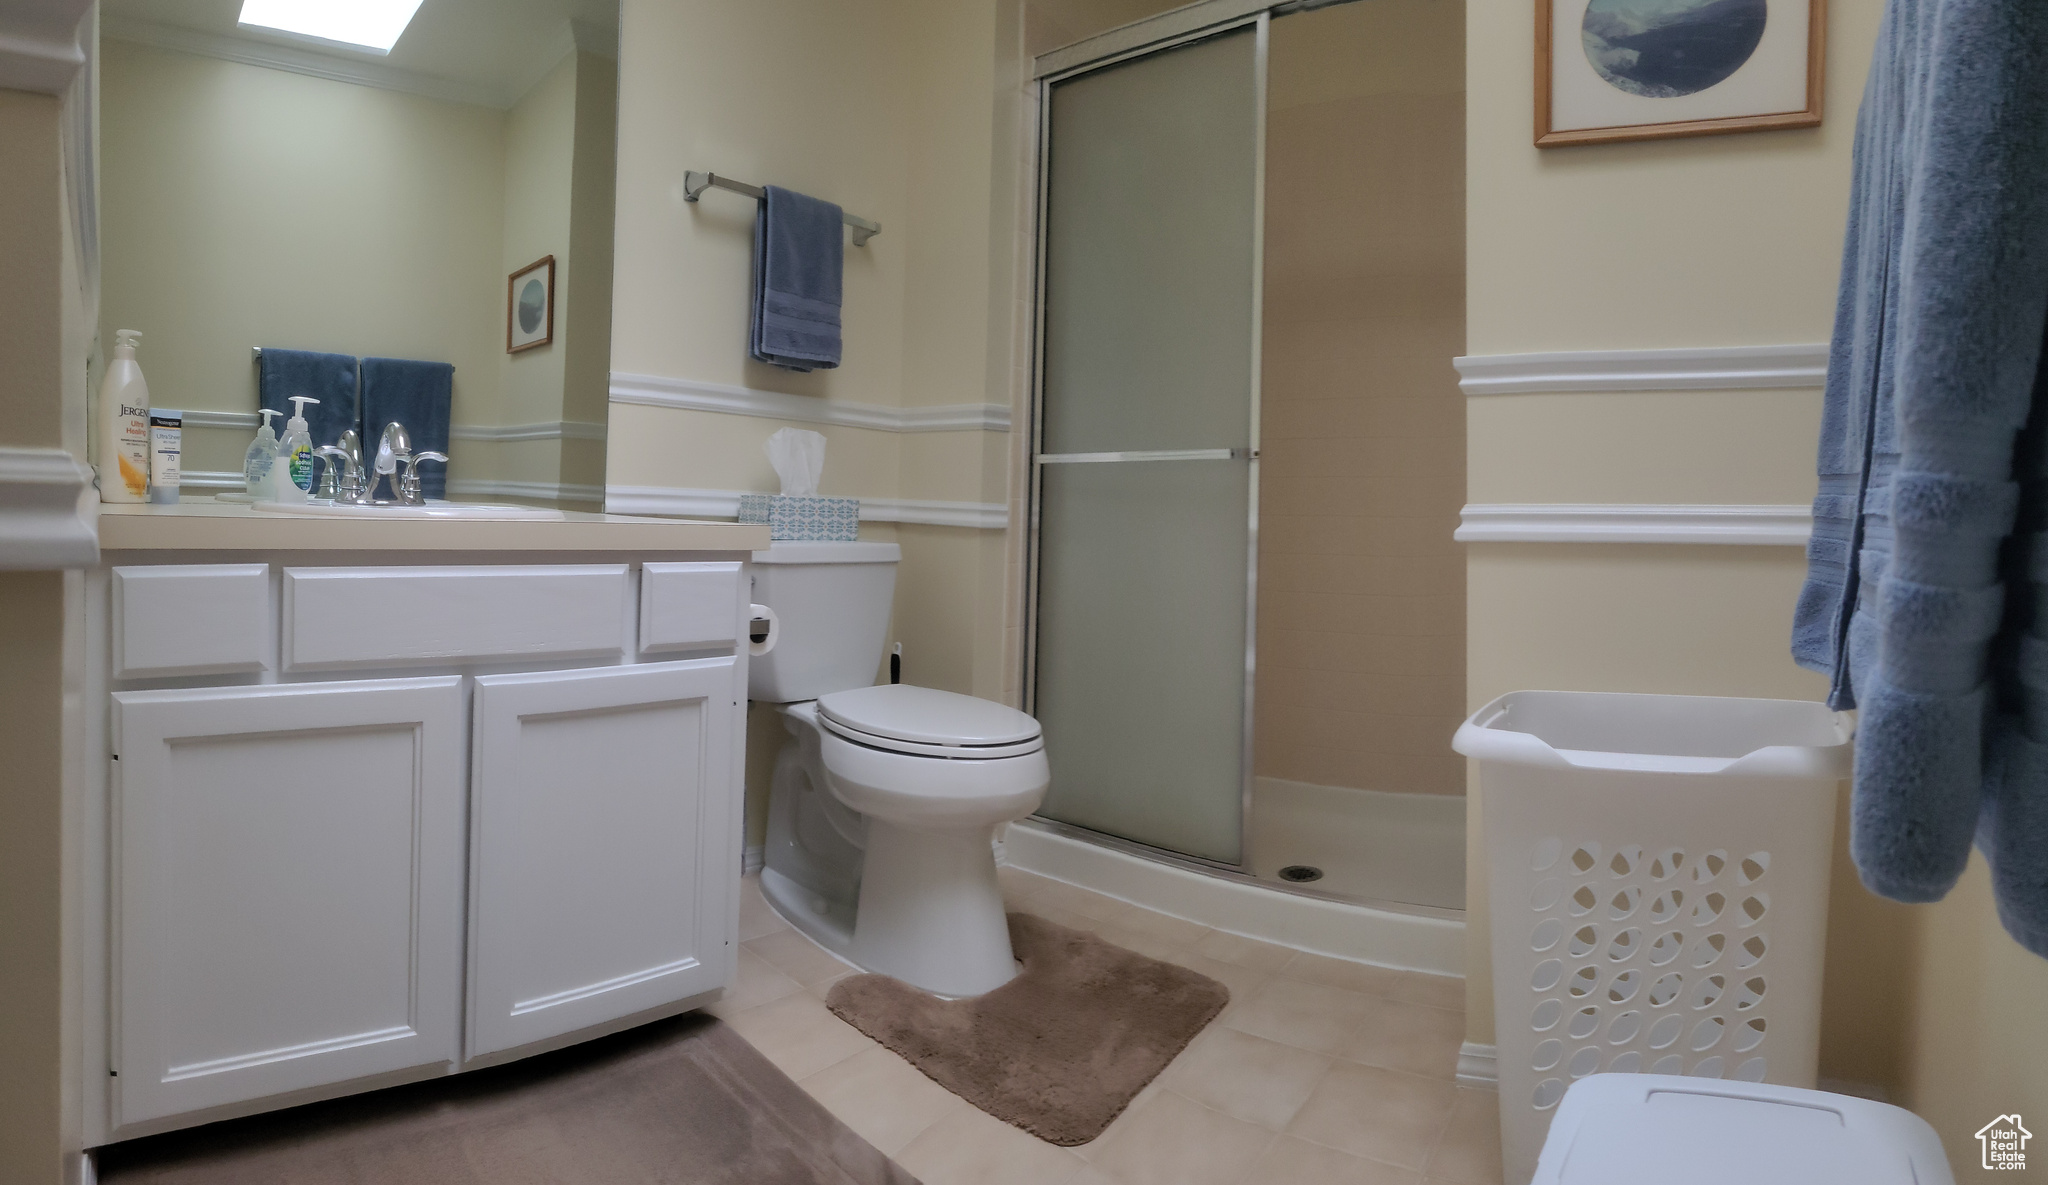 1st Bathroom is the Primary Bedroom on Suite,  with a large walk in shower, toilet, vanity, and laminate wood flooring